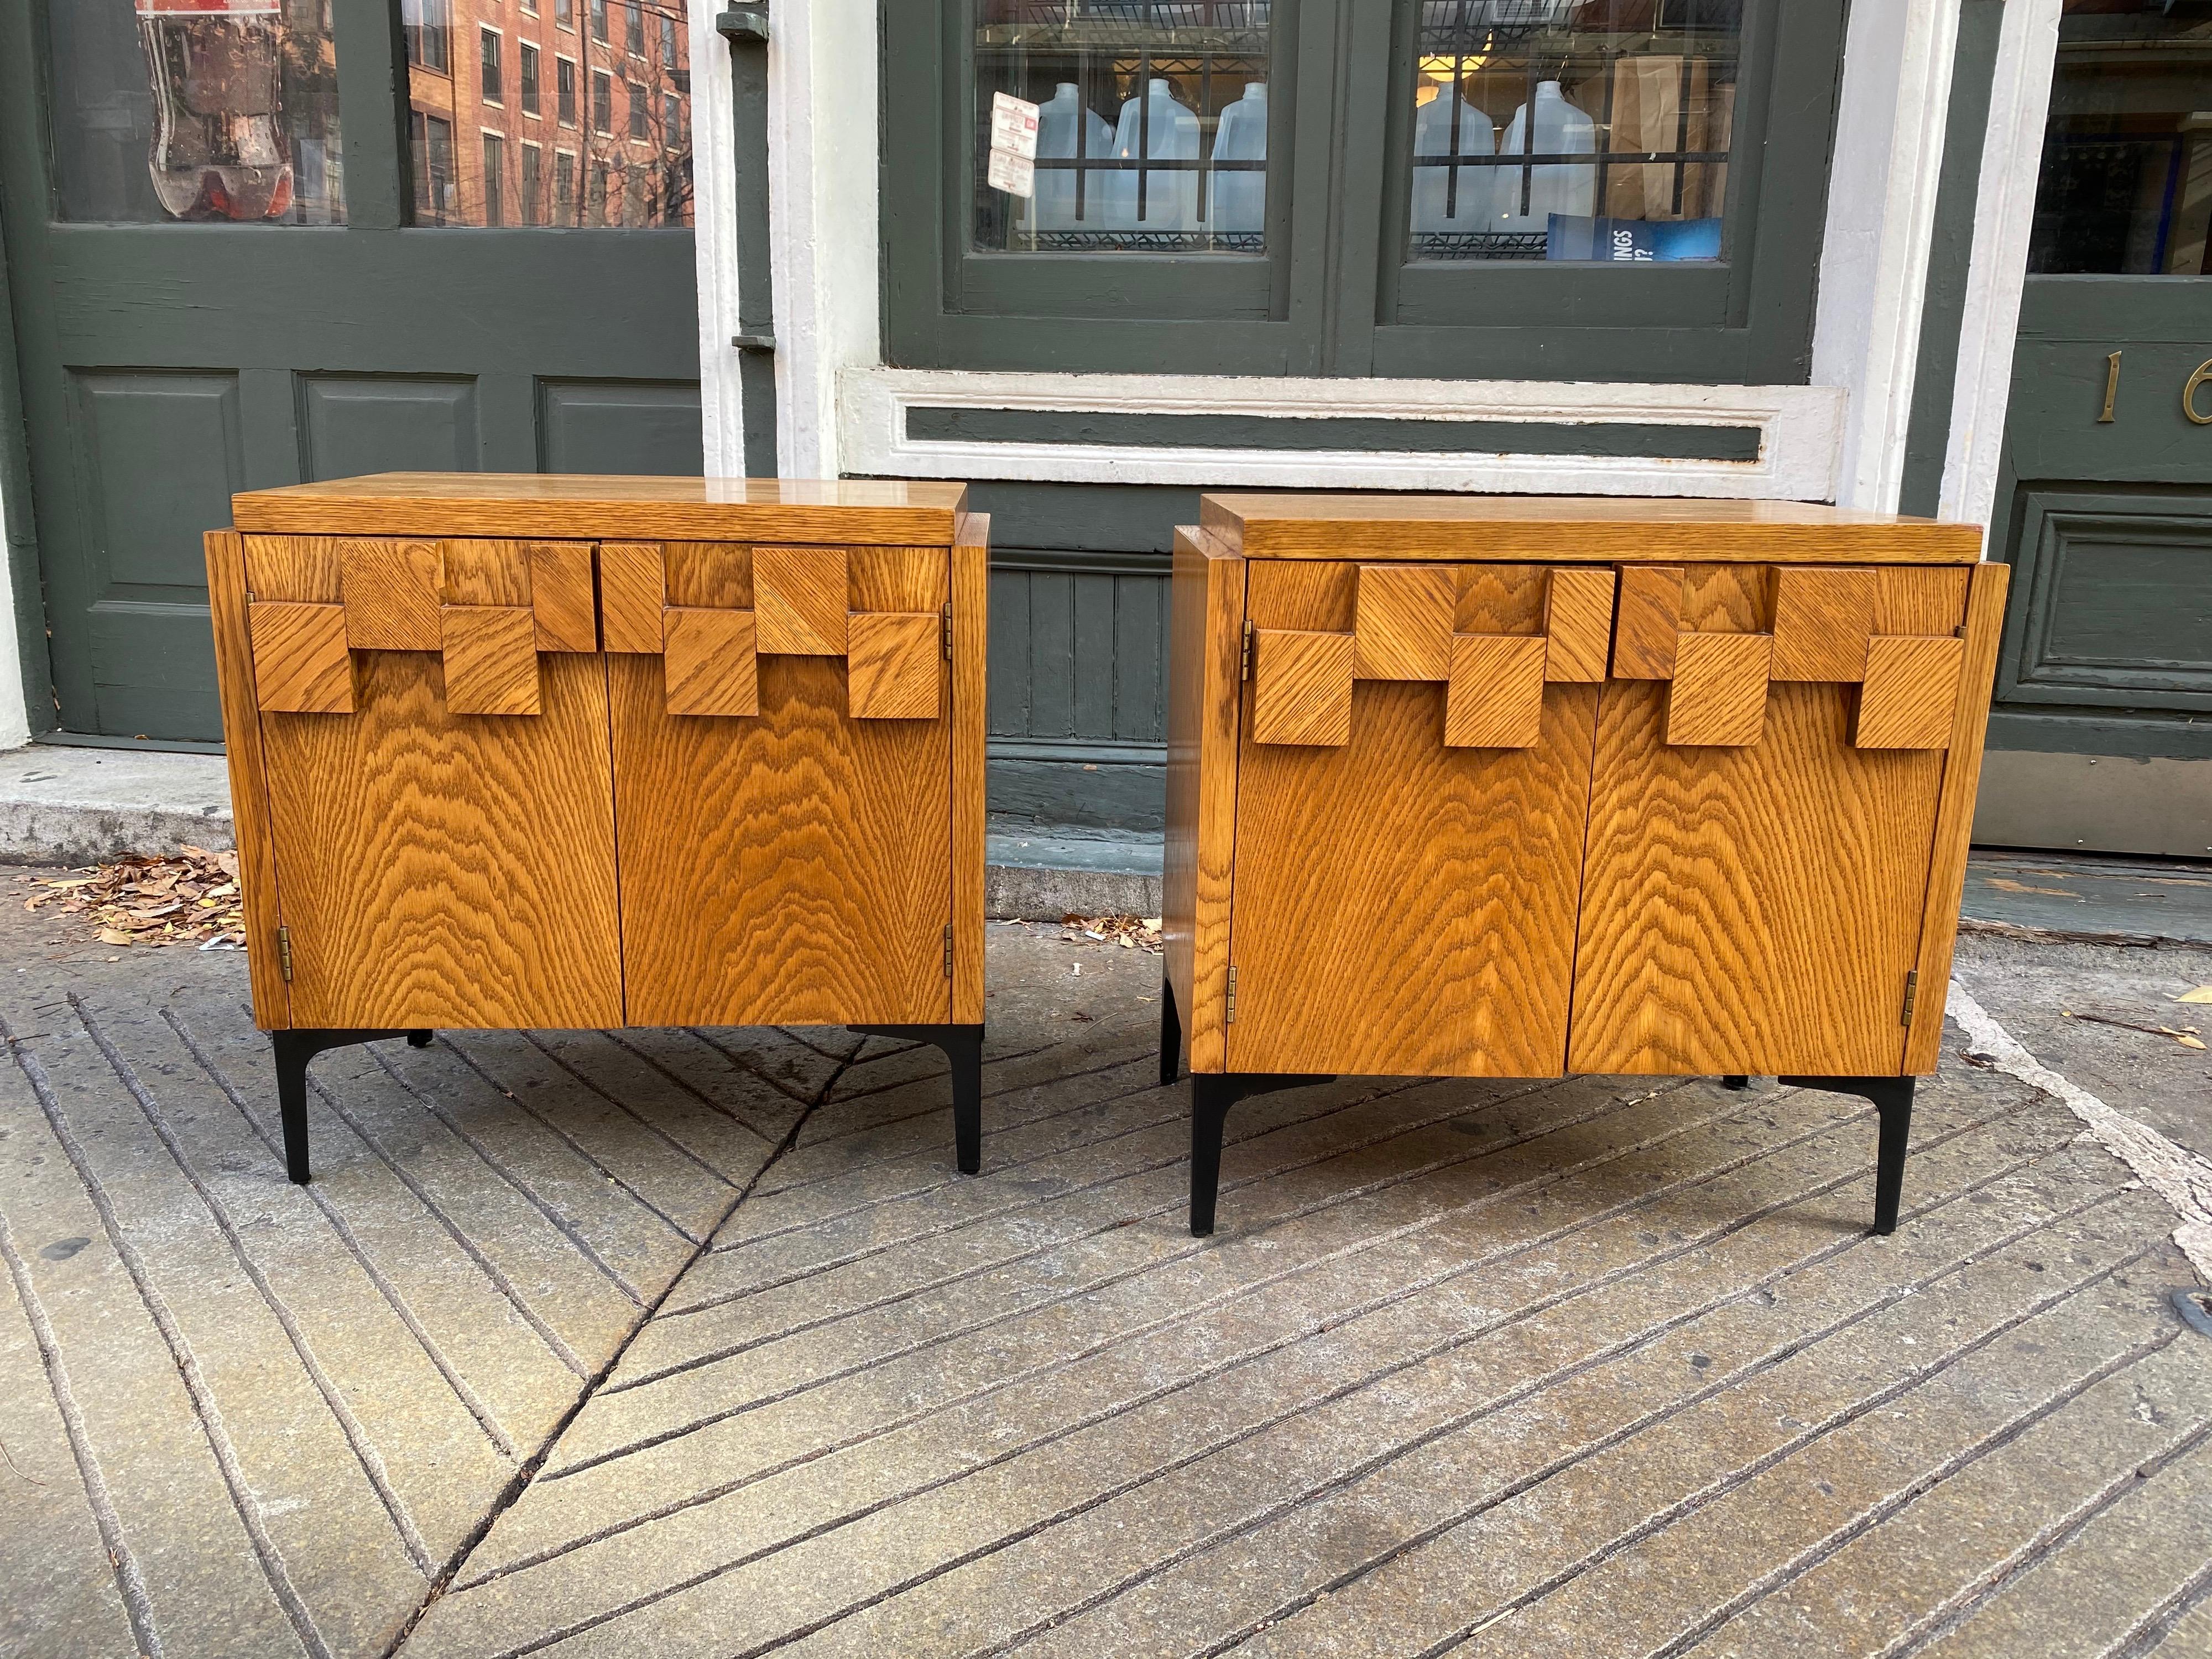 Nice matched pair of Lane end tables or nightstands in their original finish. Cubist feel to the top of each door. Rich grain throughout. Black iron legs give a nice juxtaposition to the wood cabinets.